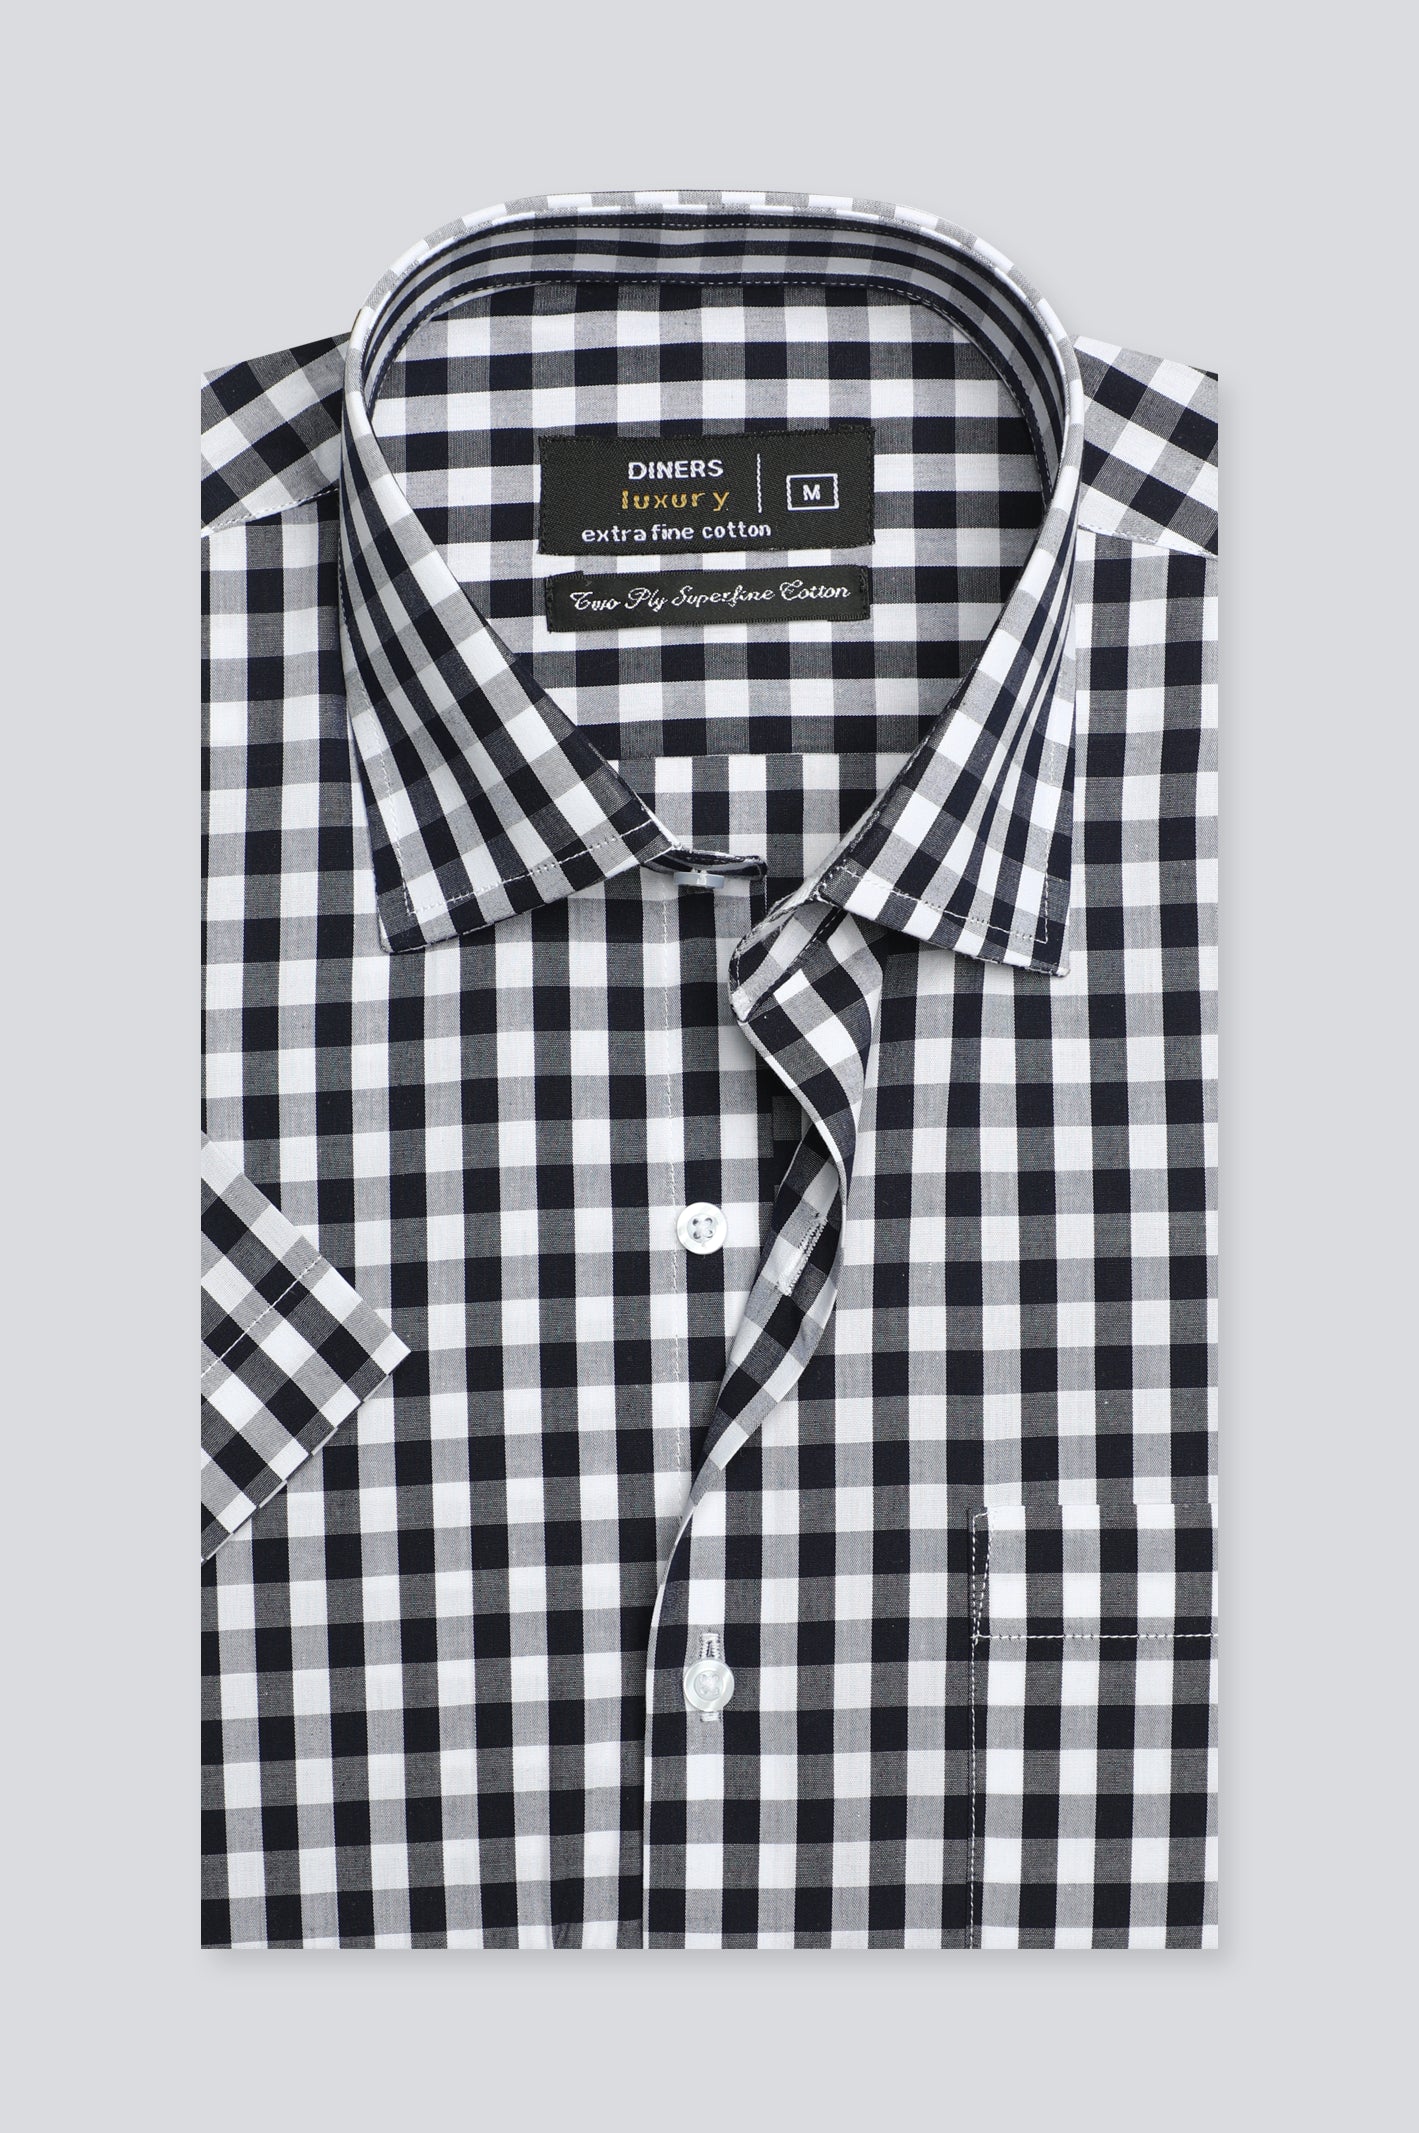 Black Gingham Check Formal Shirt (Half Sleeves) From Diners